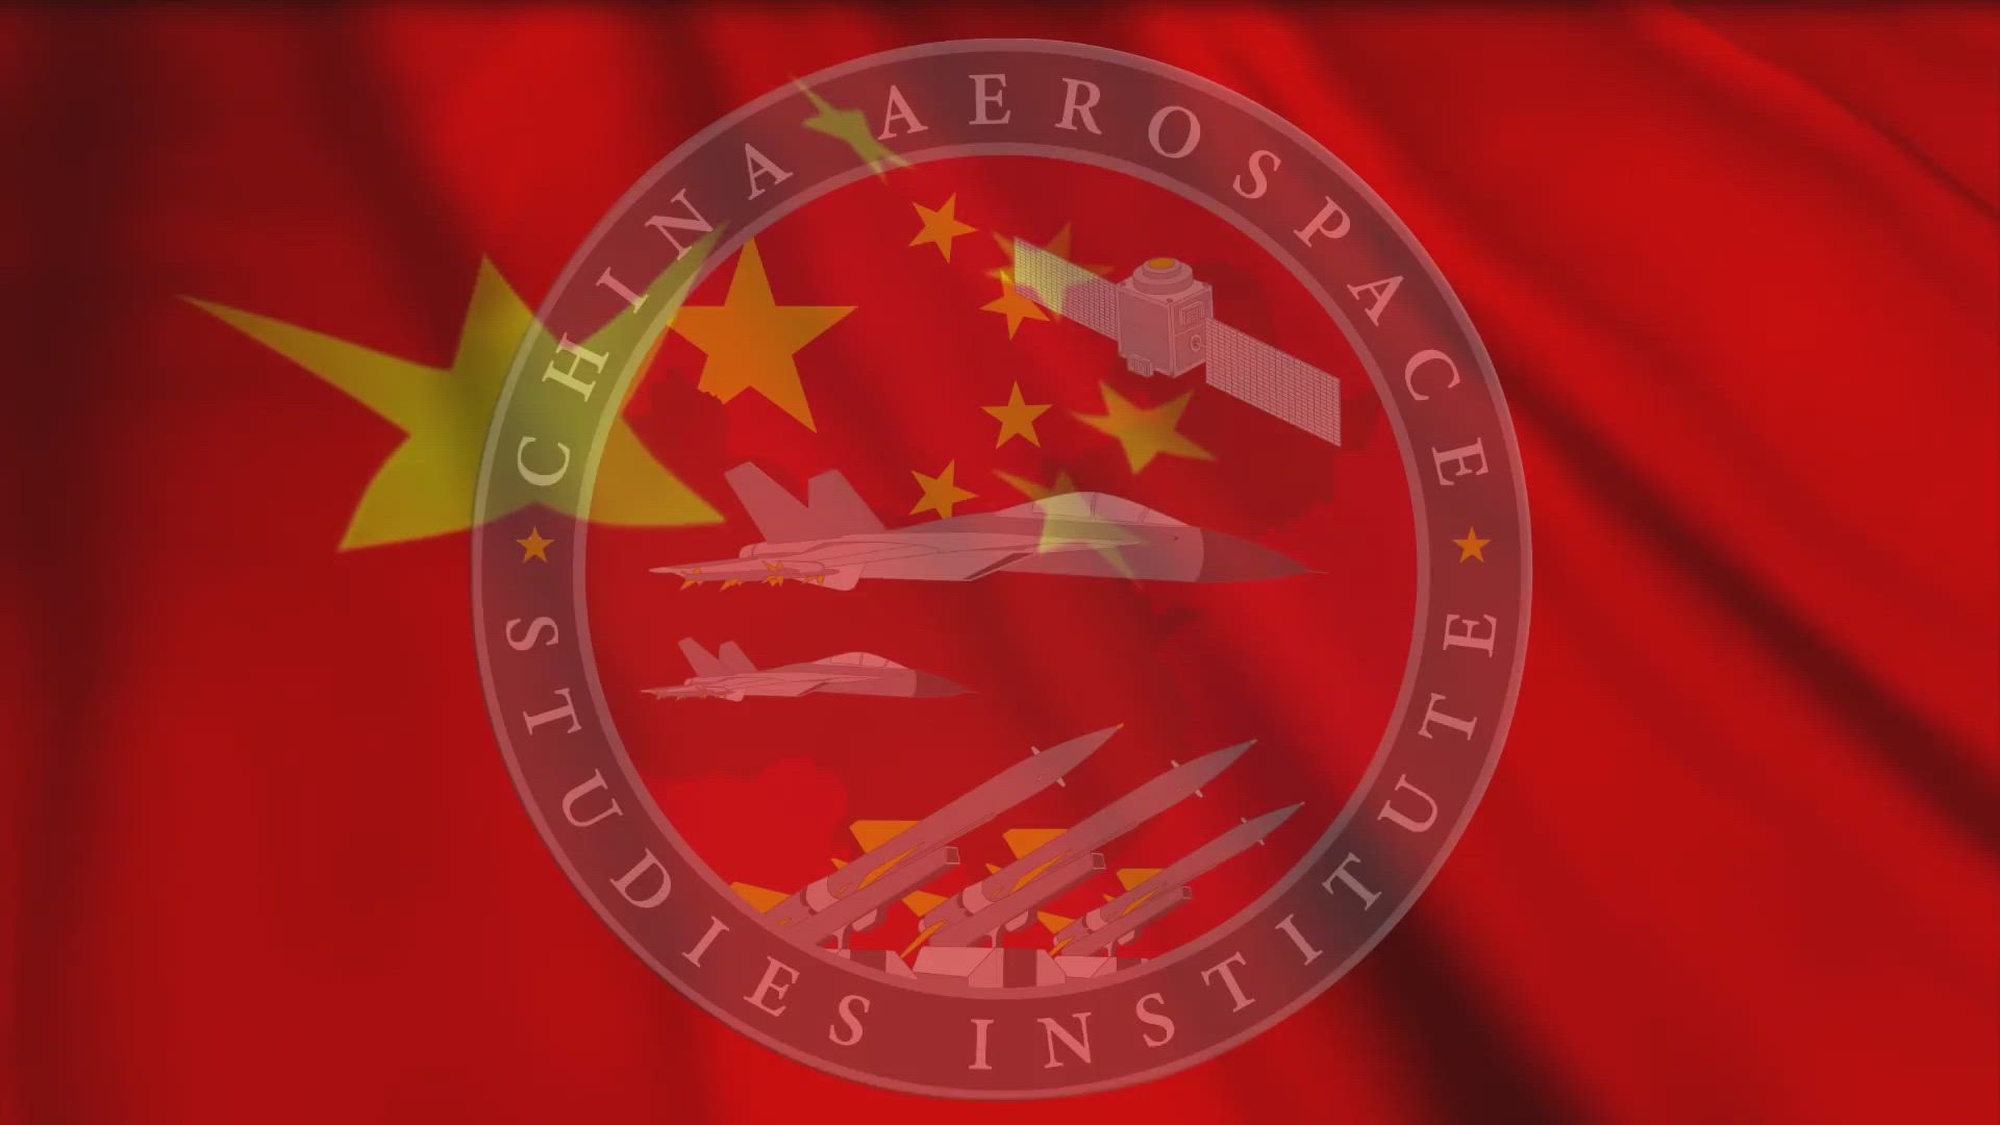 Introduction video to China Aerospace Studies Institute